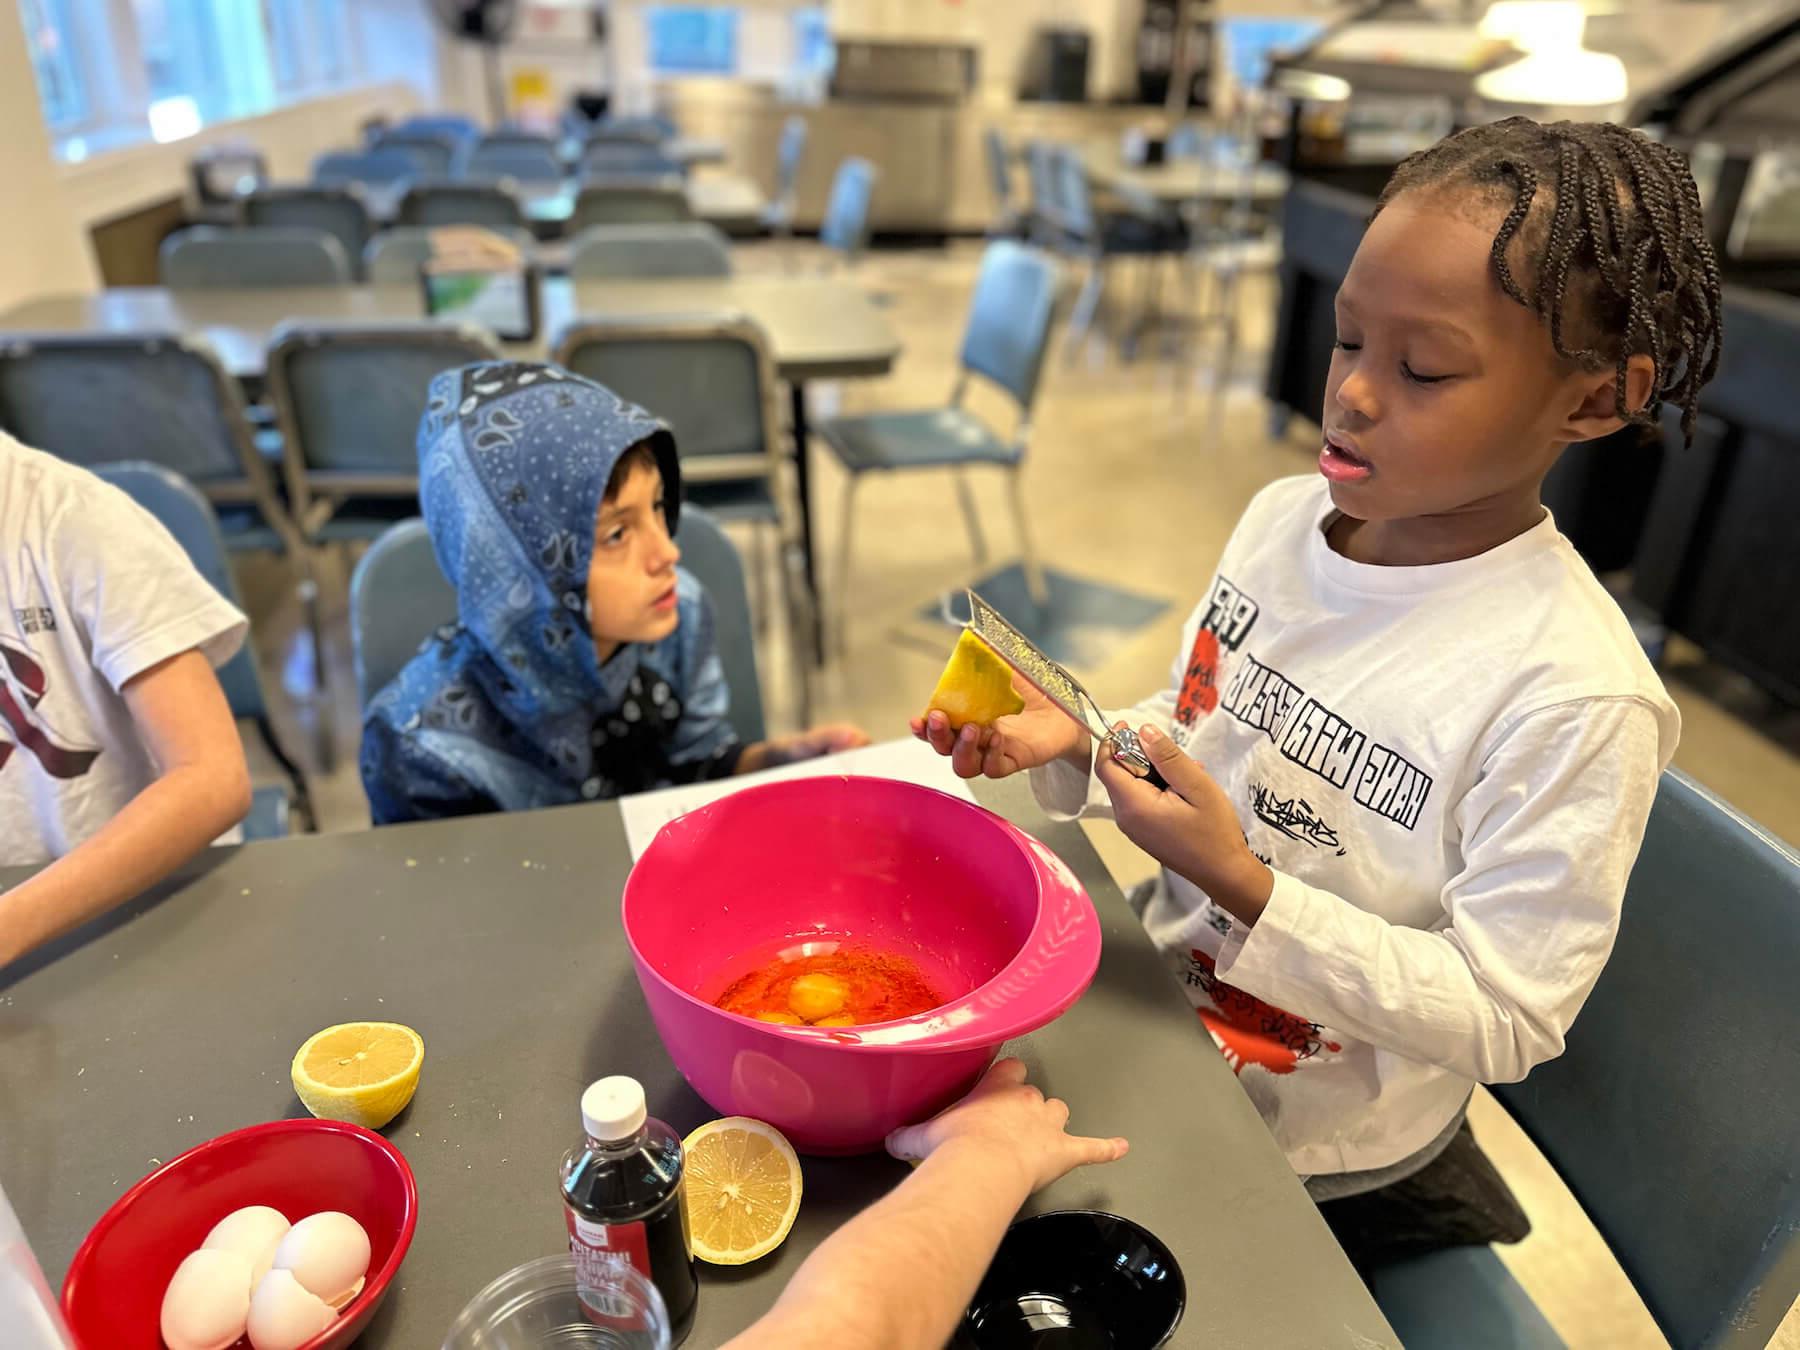 Ethical Culture Fieldston School students zesting a lemon in after school cooking class